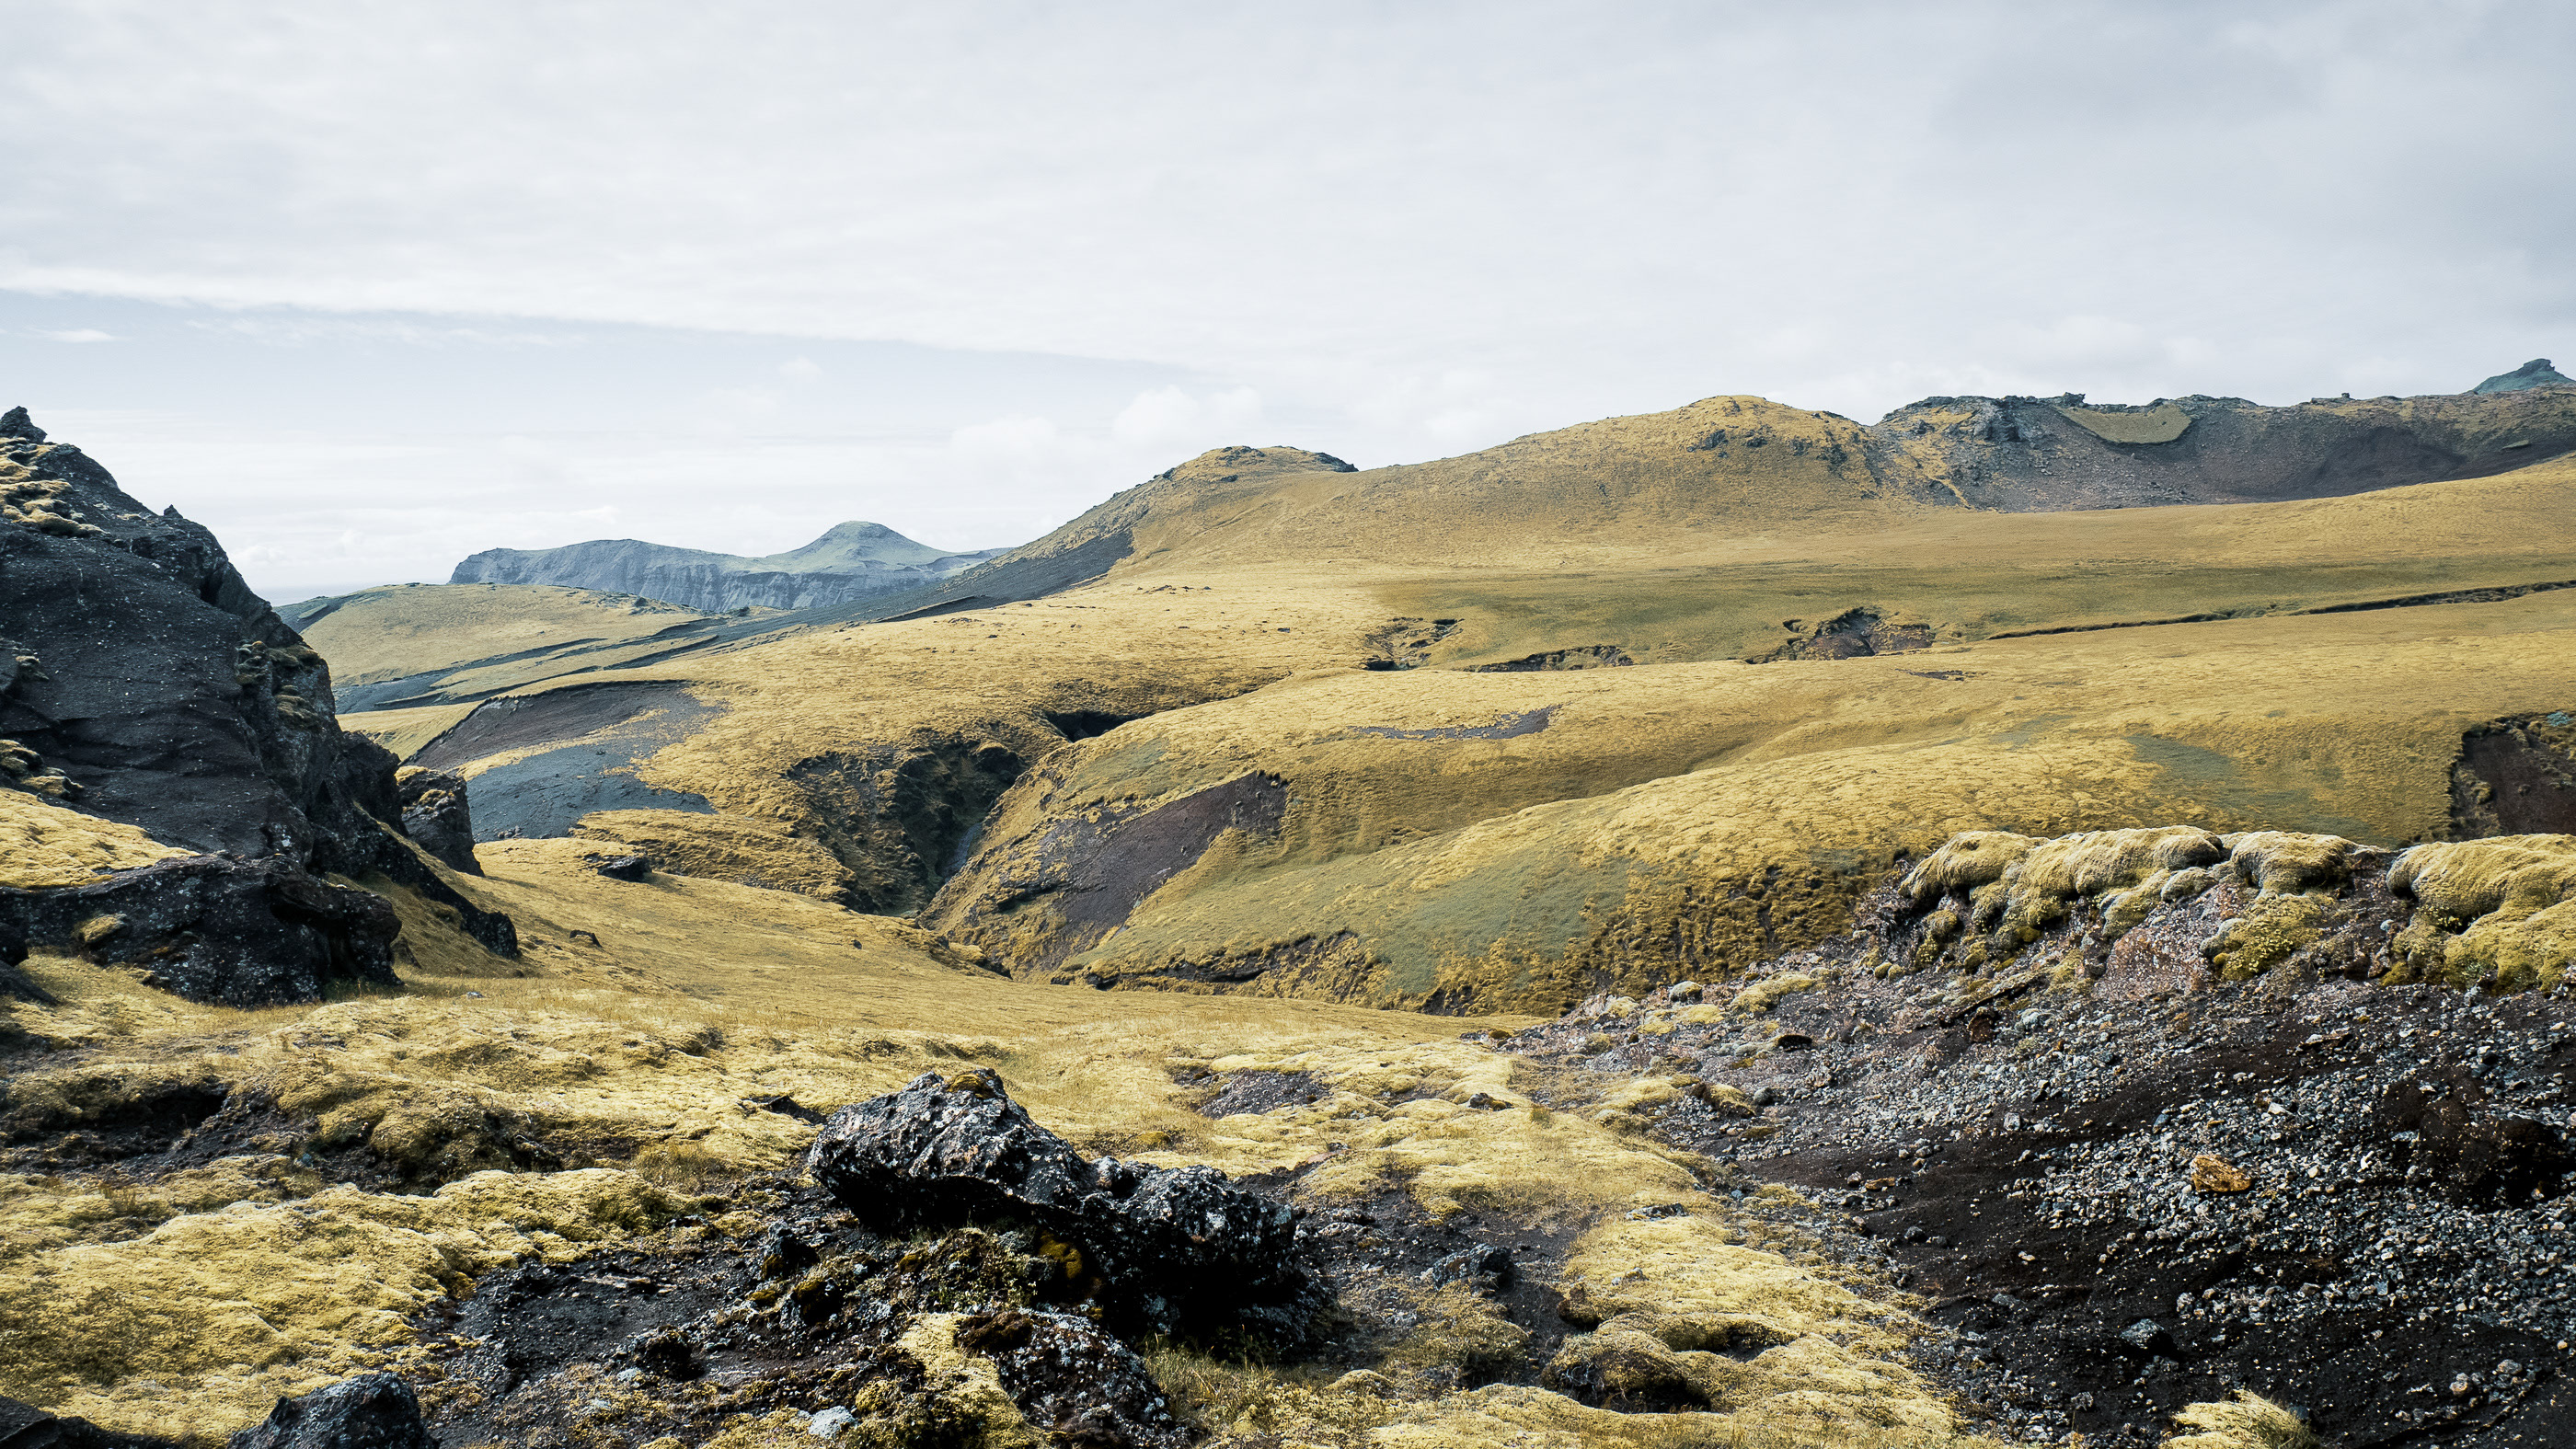 Photography Landscape Nature Mountains Rock Formation Sky Iceland Field Behance 2800x1575